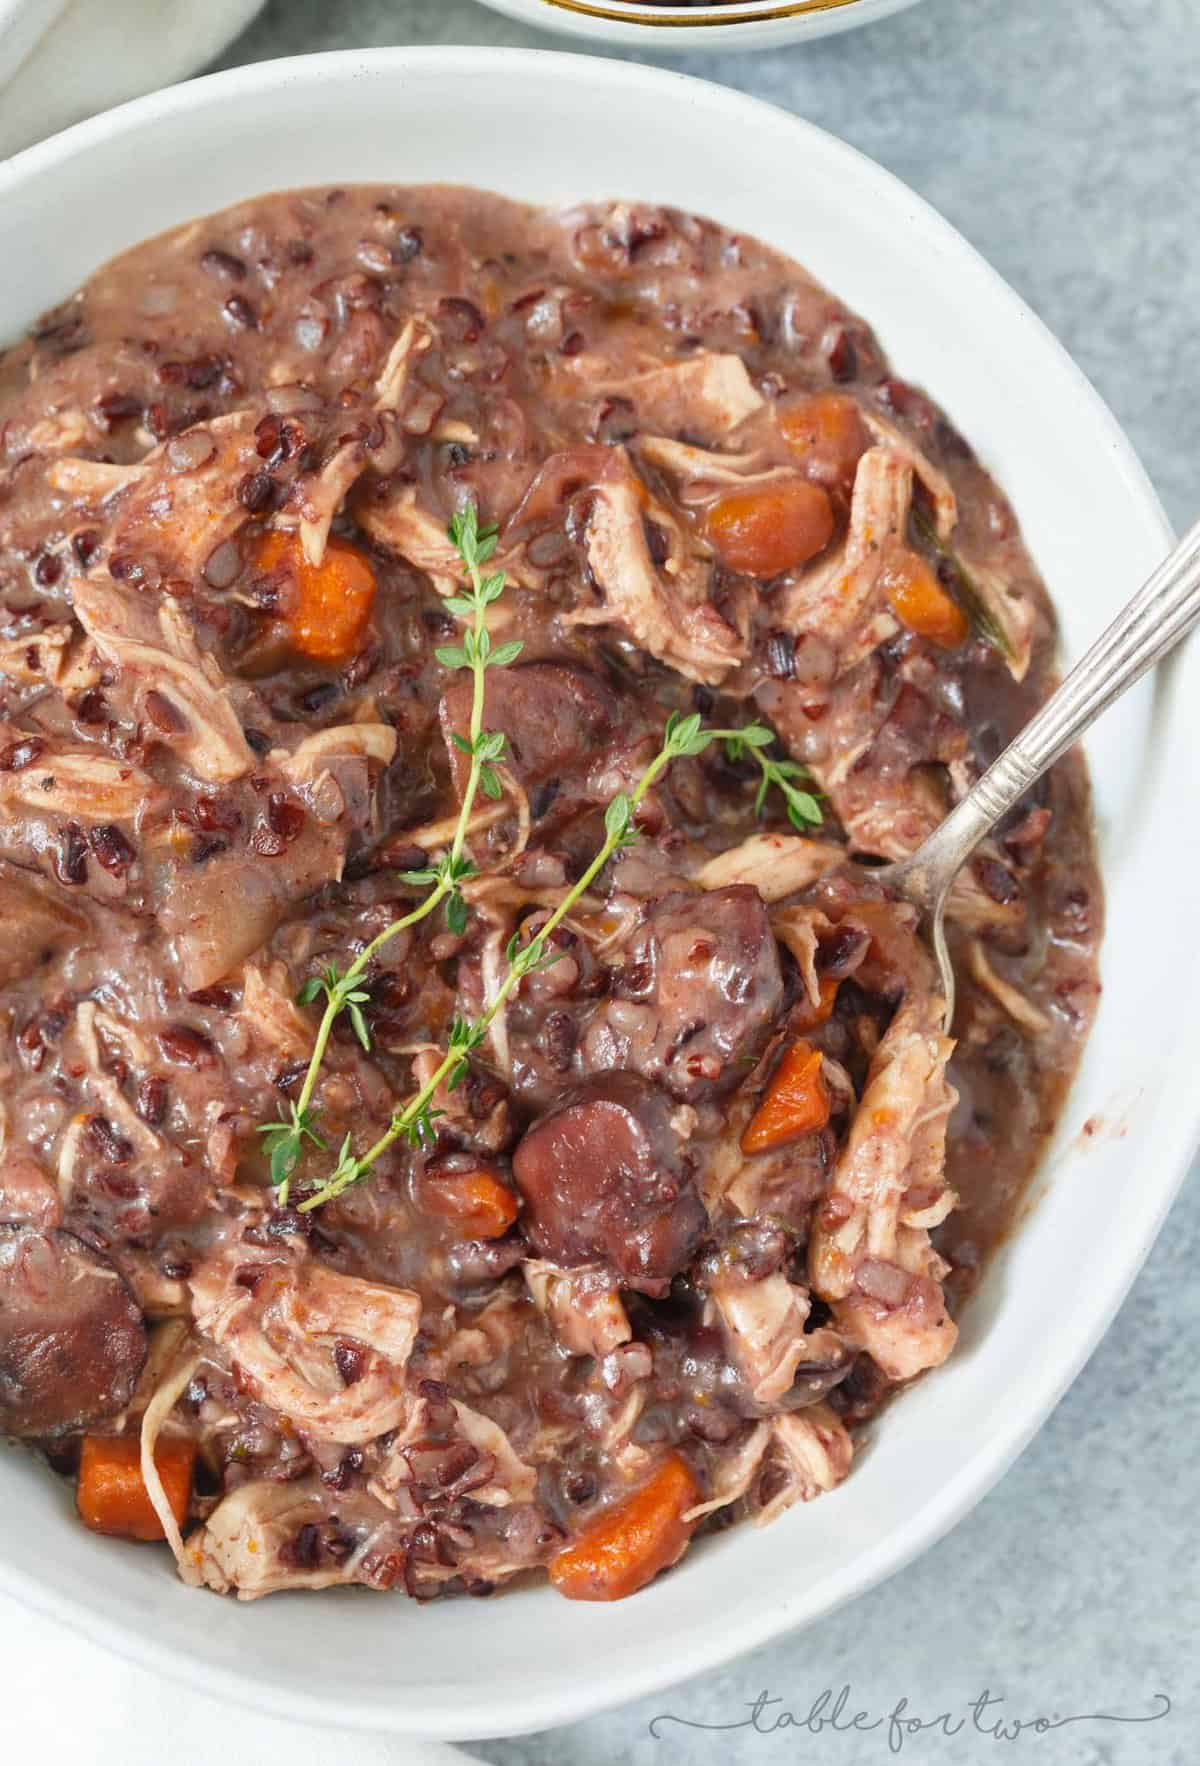 Throw everything into the Instant Pot and you have yourself a hearty and creamy mushroom and chicken wild rice stew to warm you up!